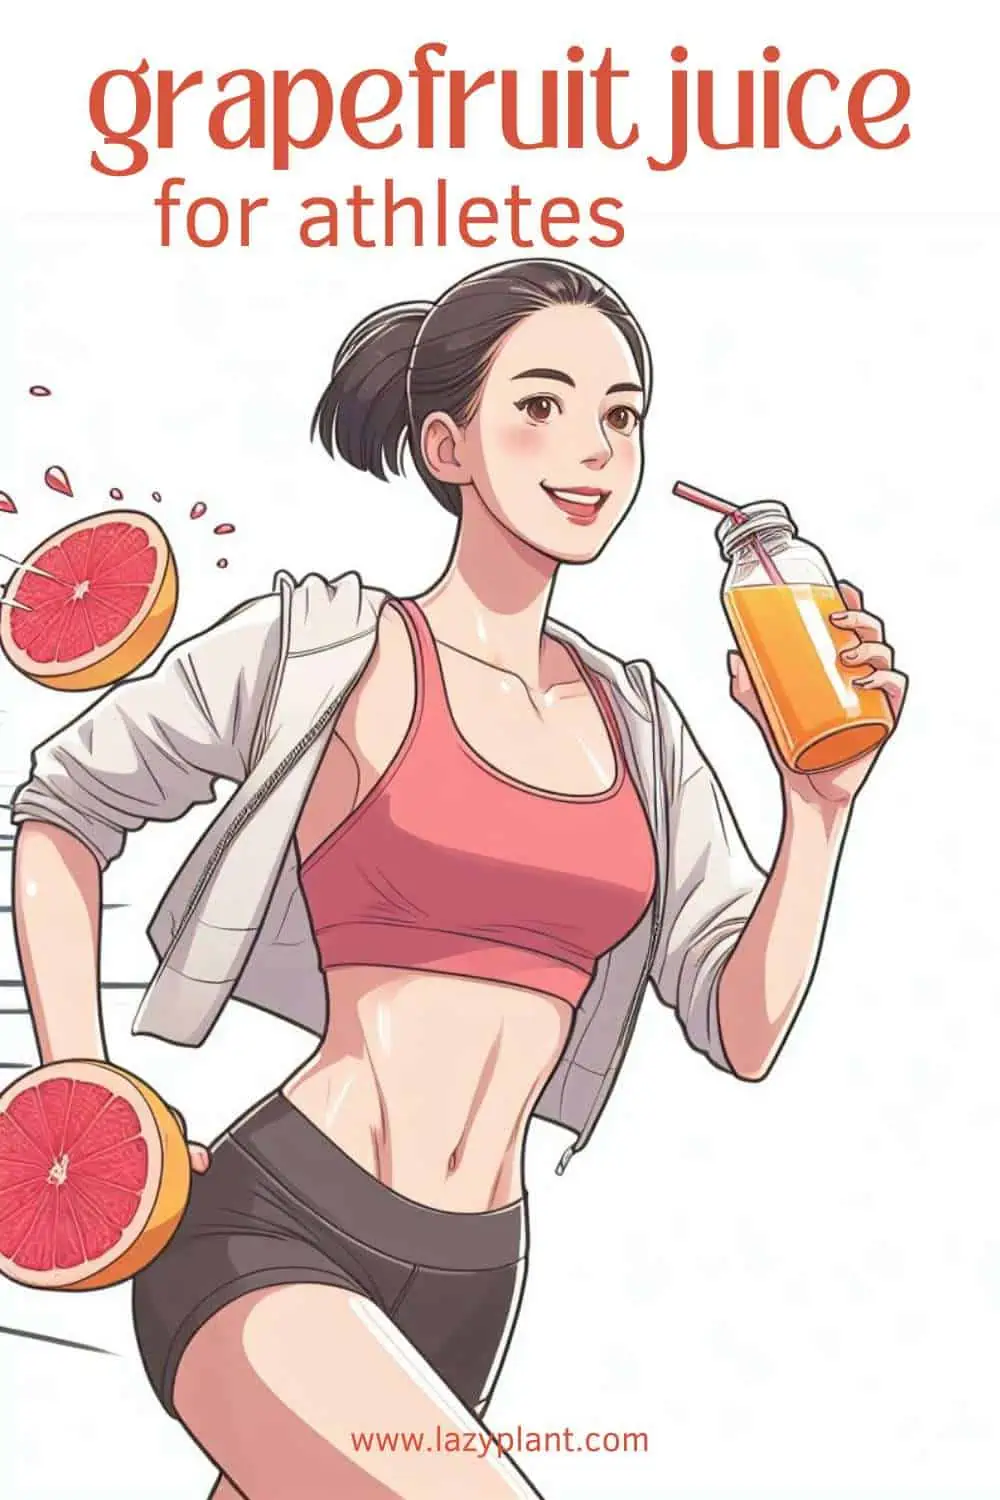 Grapefruit juice: the ultimate post-workout drink.